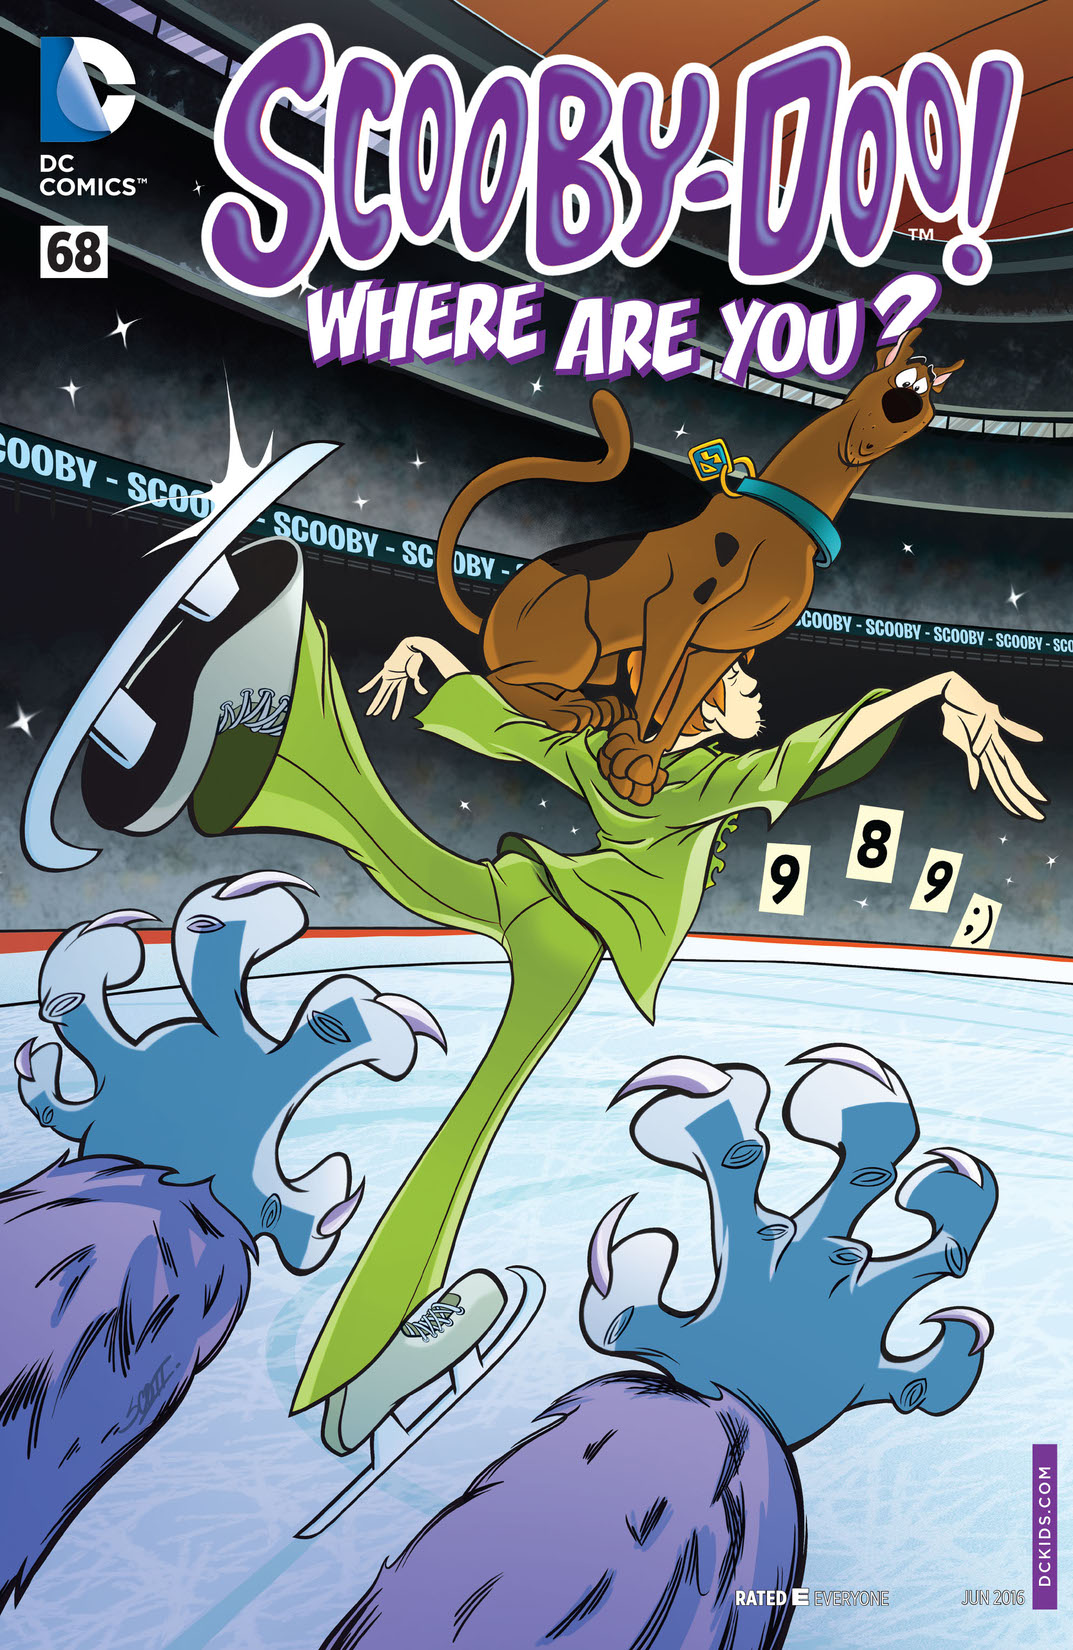 Scooby-Doo, Where Are You? #68 preview images